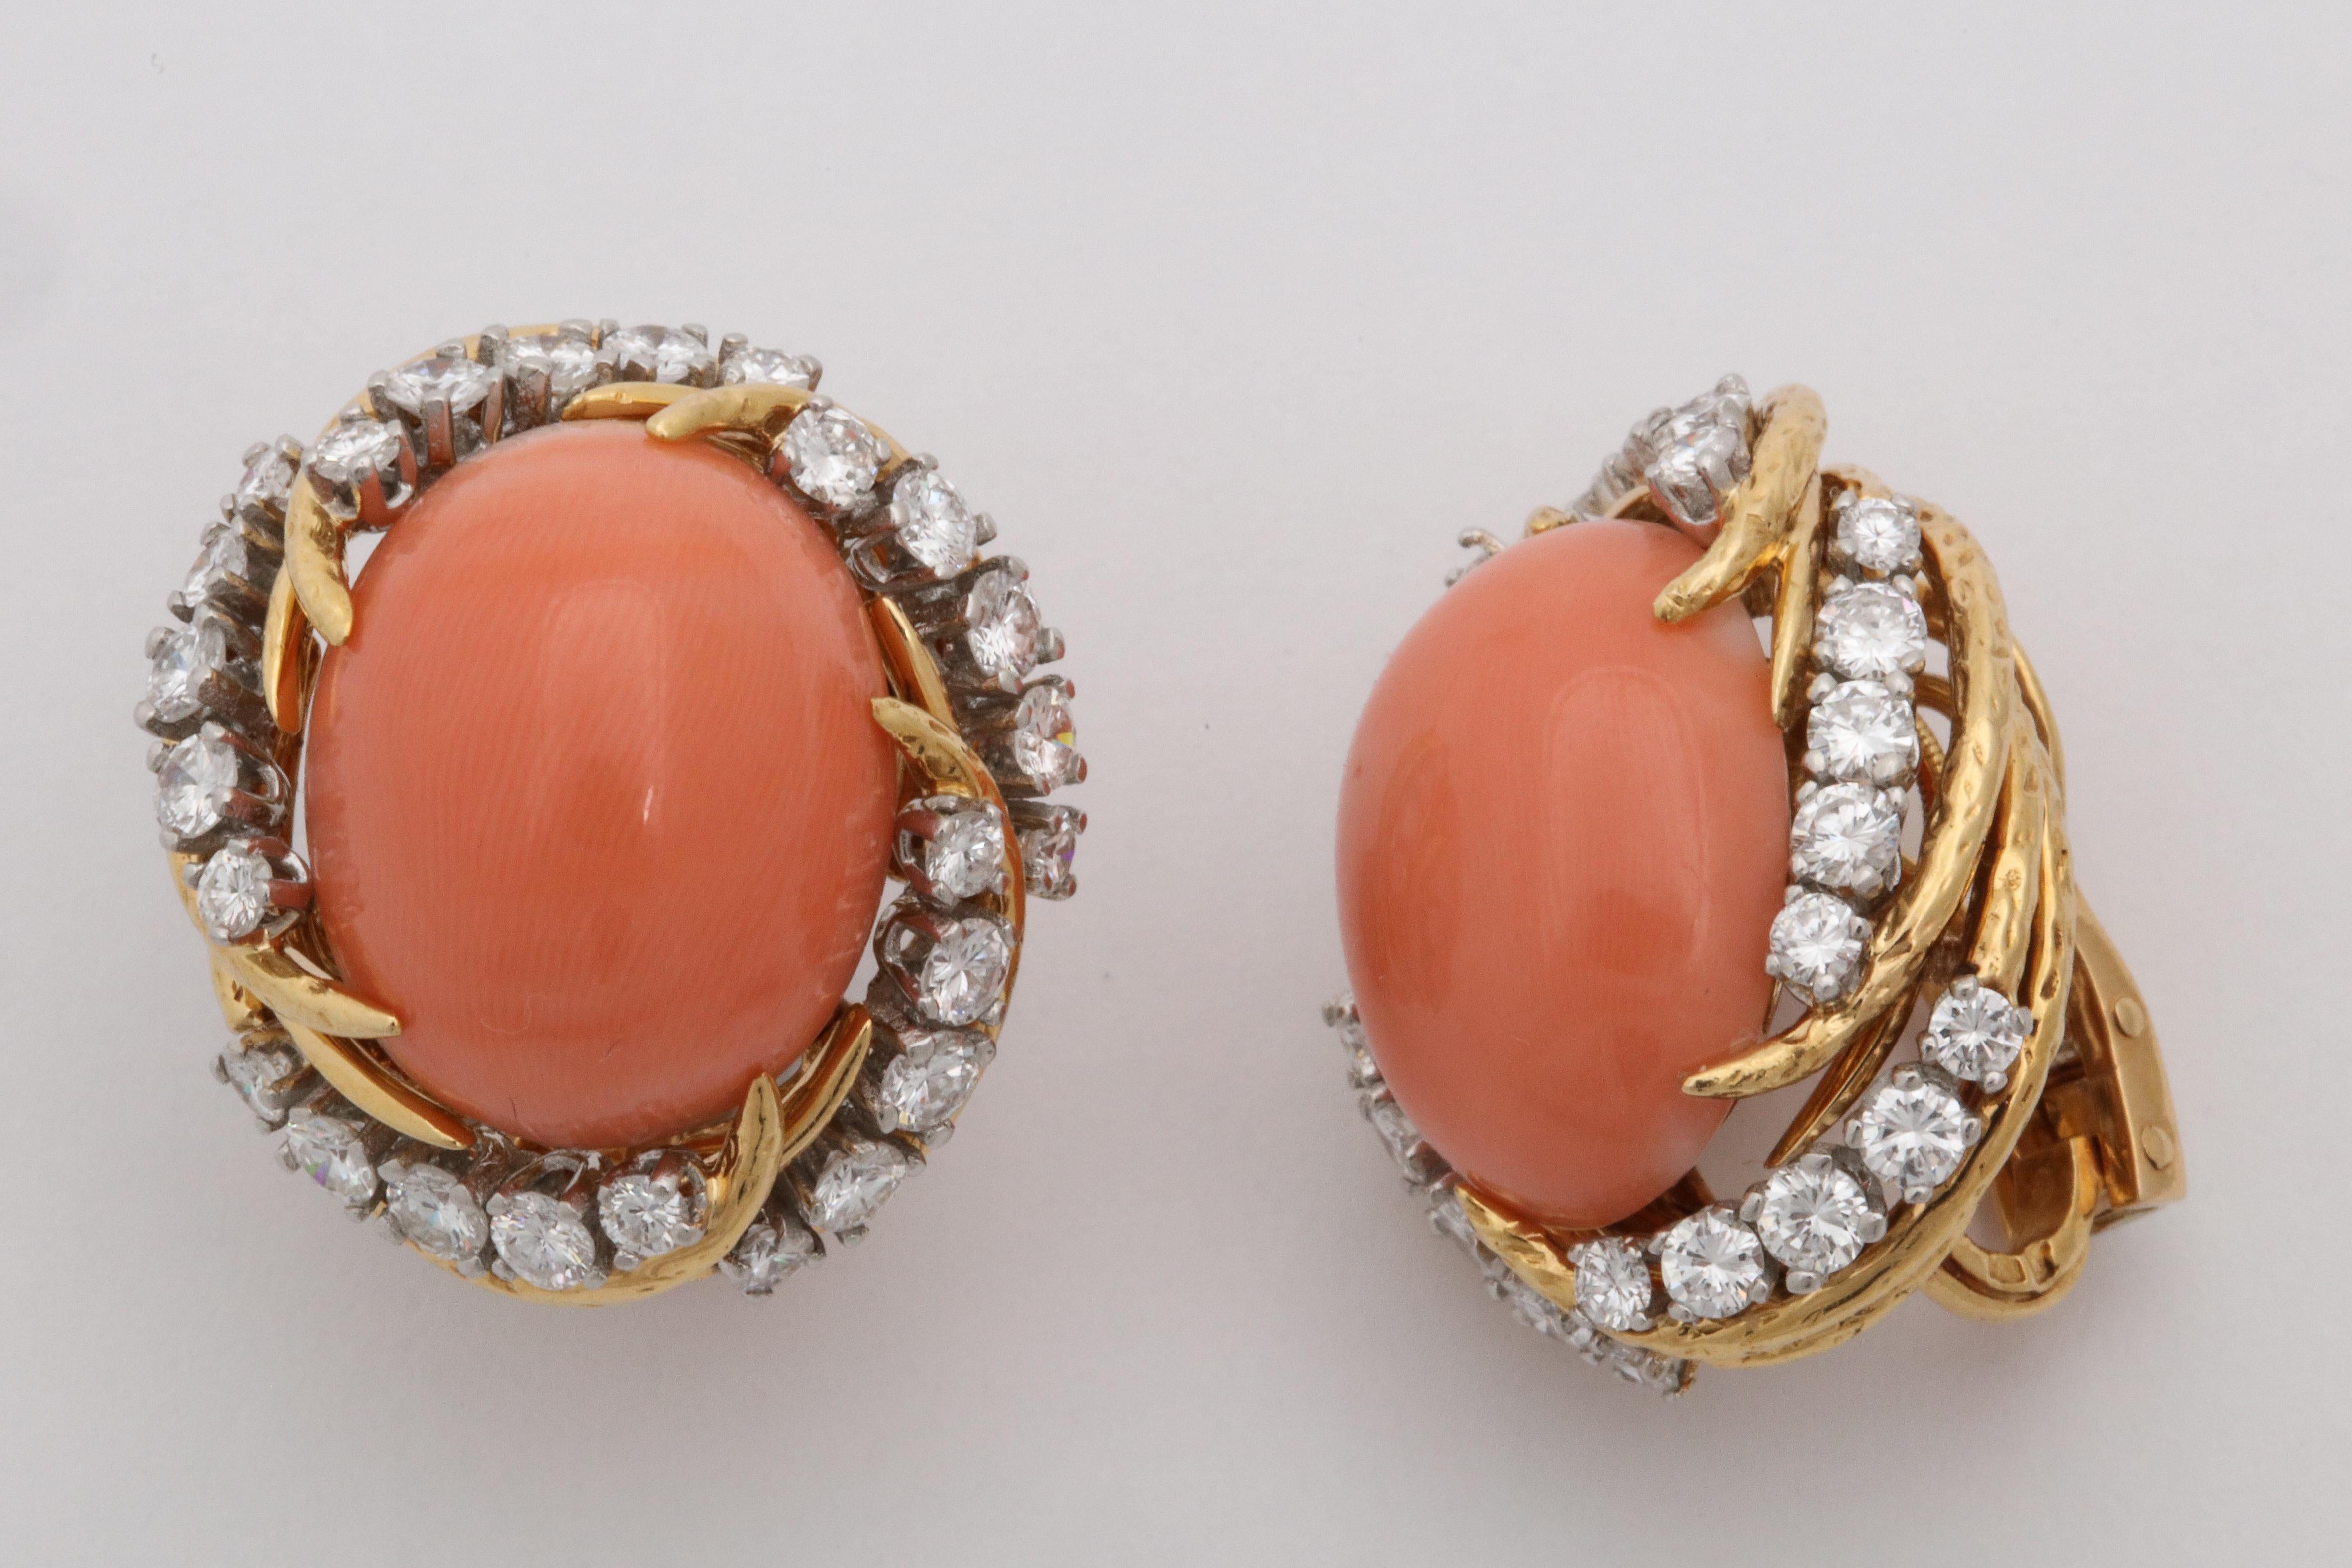 One Pair Of Ladies Elegant Swirl Design Earclips Created In 18kt Textured Gold Setting. Earrings Are Further Designed With Two Large Oval Cut 17MM Cabochon Coral Stones. Corals Are Surrounded By Numerous High Quality Full Cut Diamonds Weighing